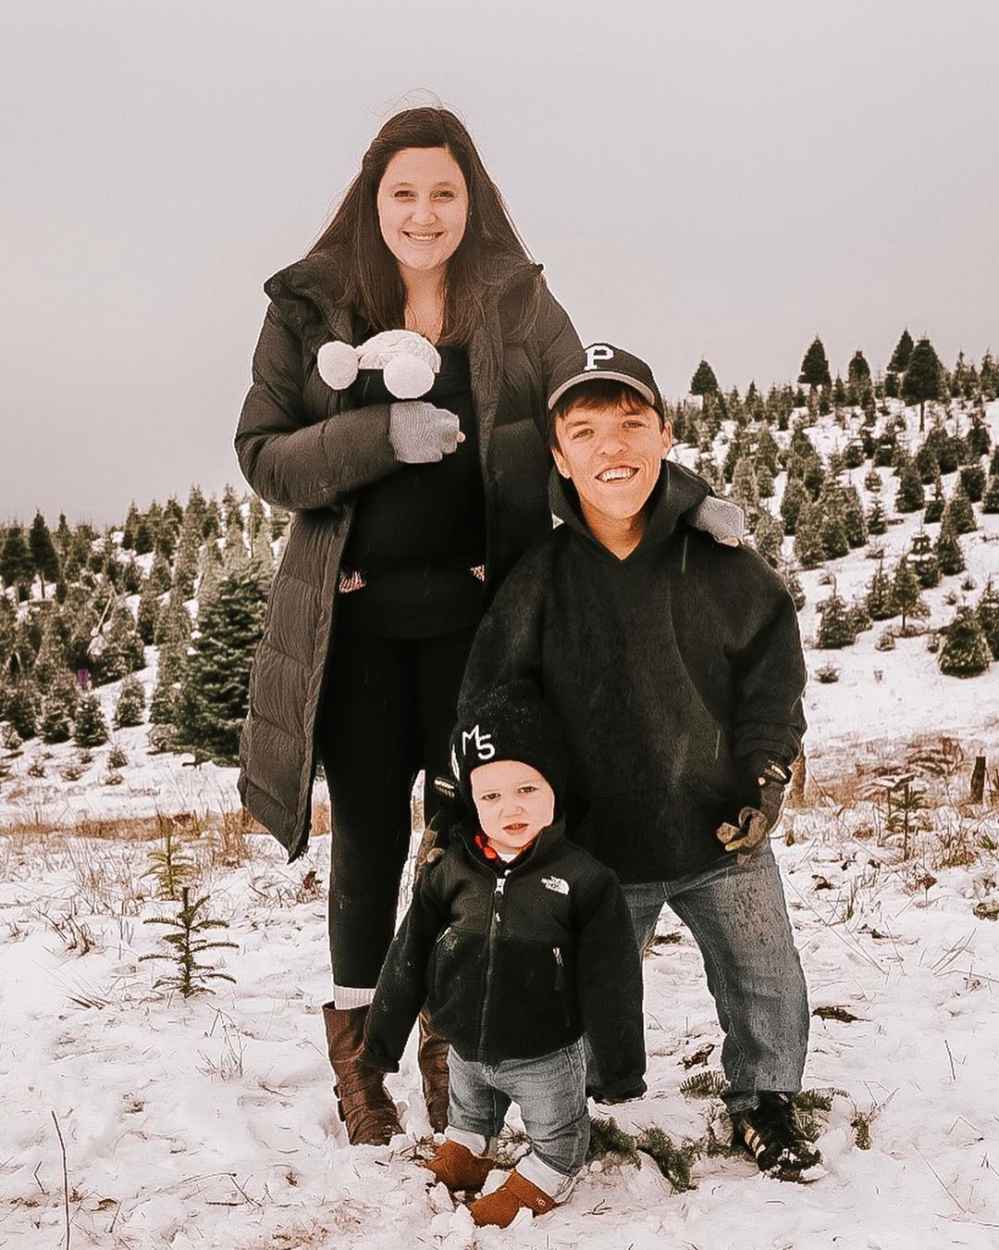 Tori Roloff and Zach Roloff ‘Barely Survived’ Christmas Tree Trip